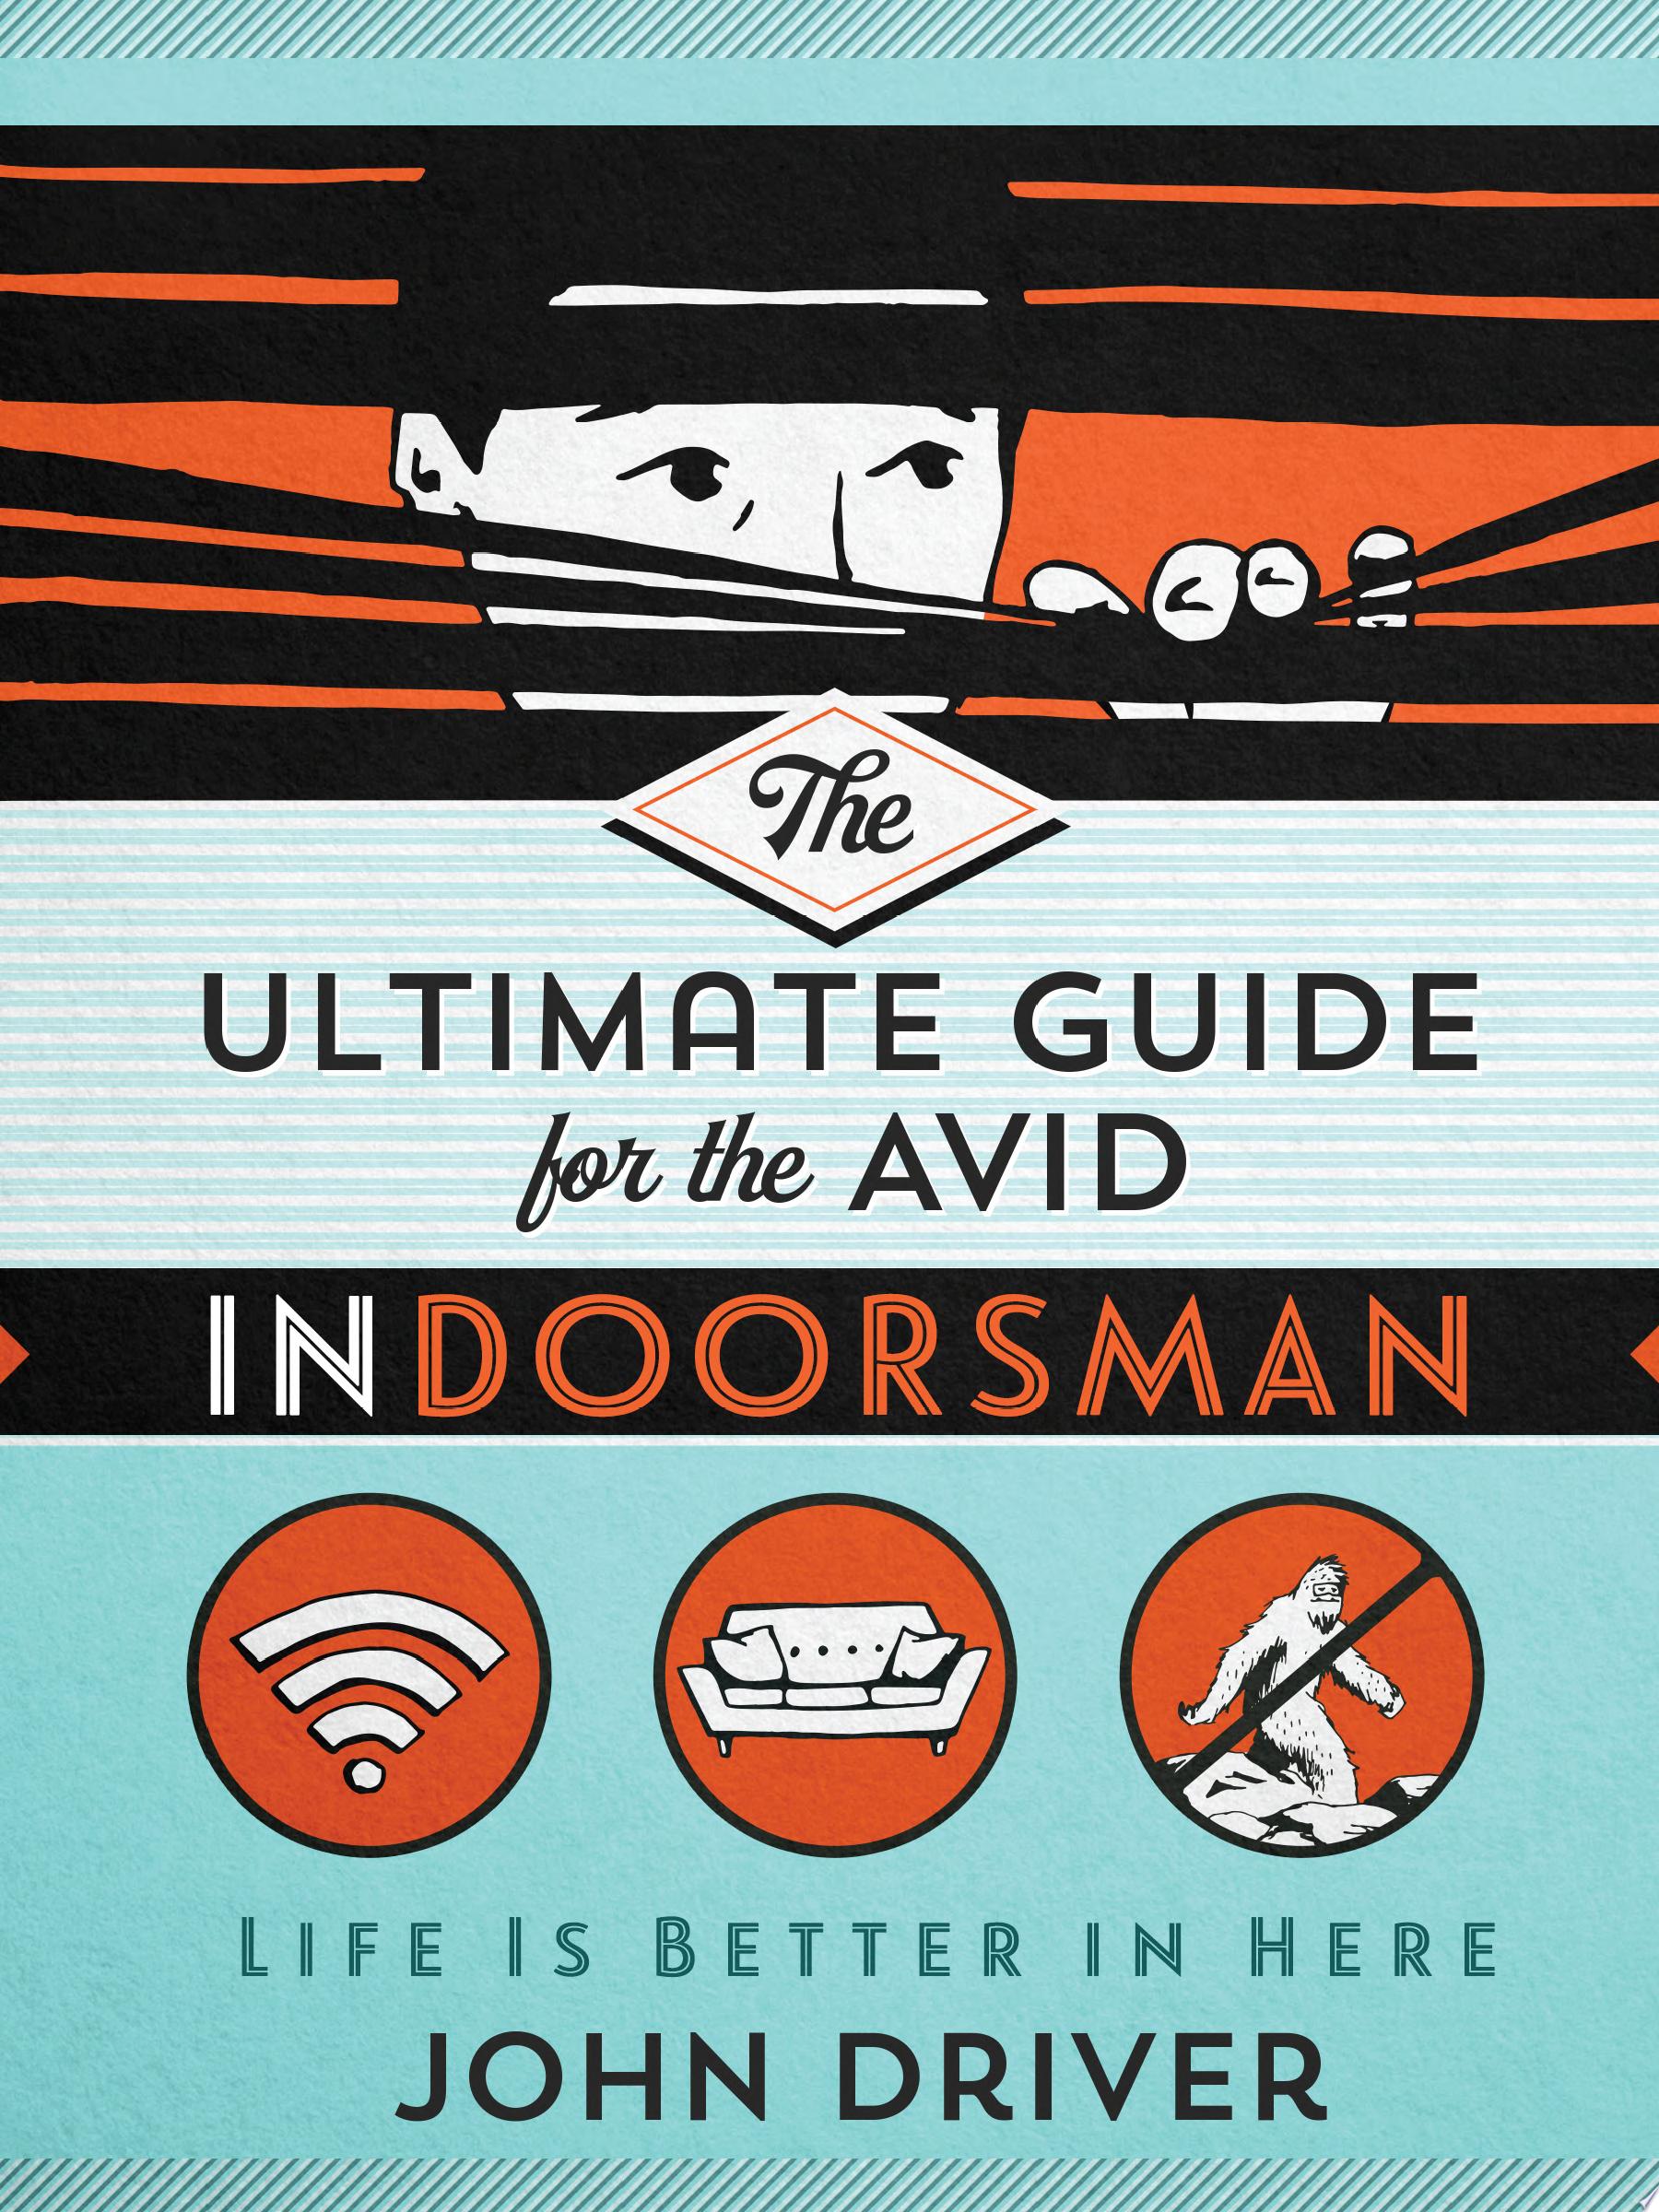 Image for "The Ultimate Guide for the Avid Indoorsman"